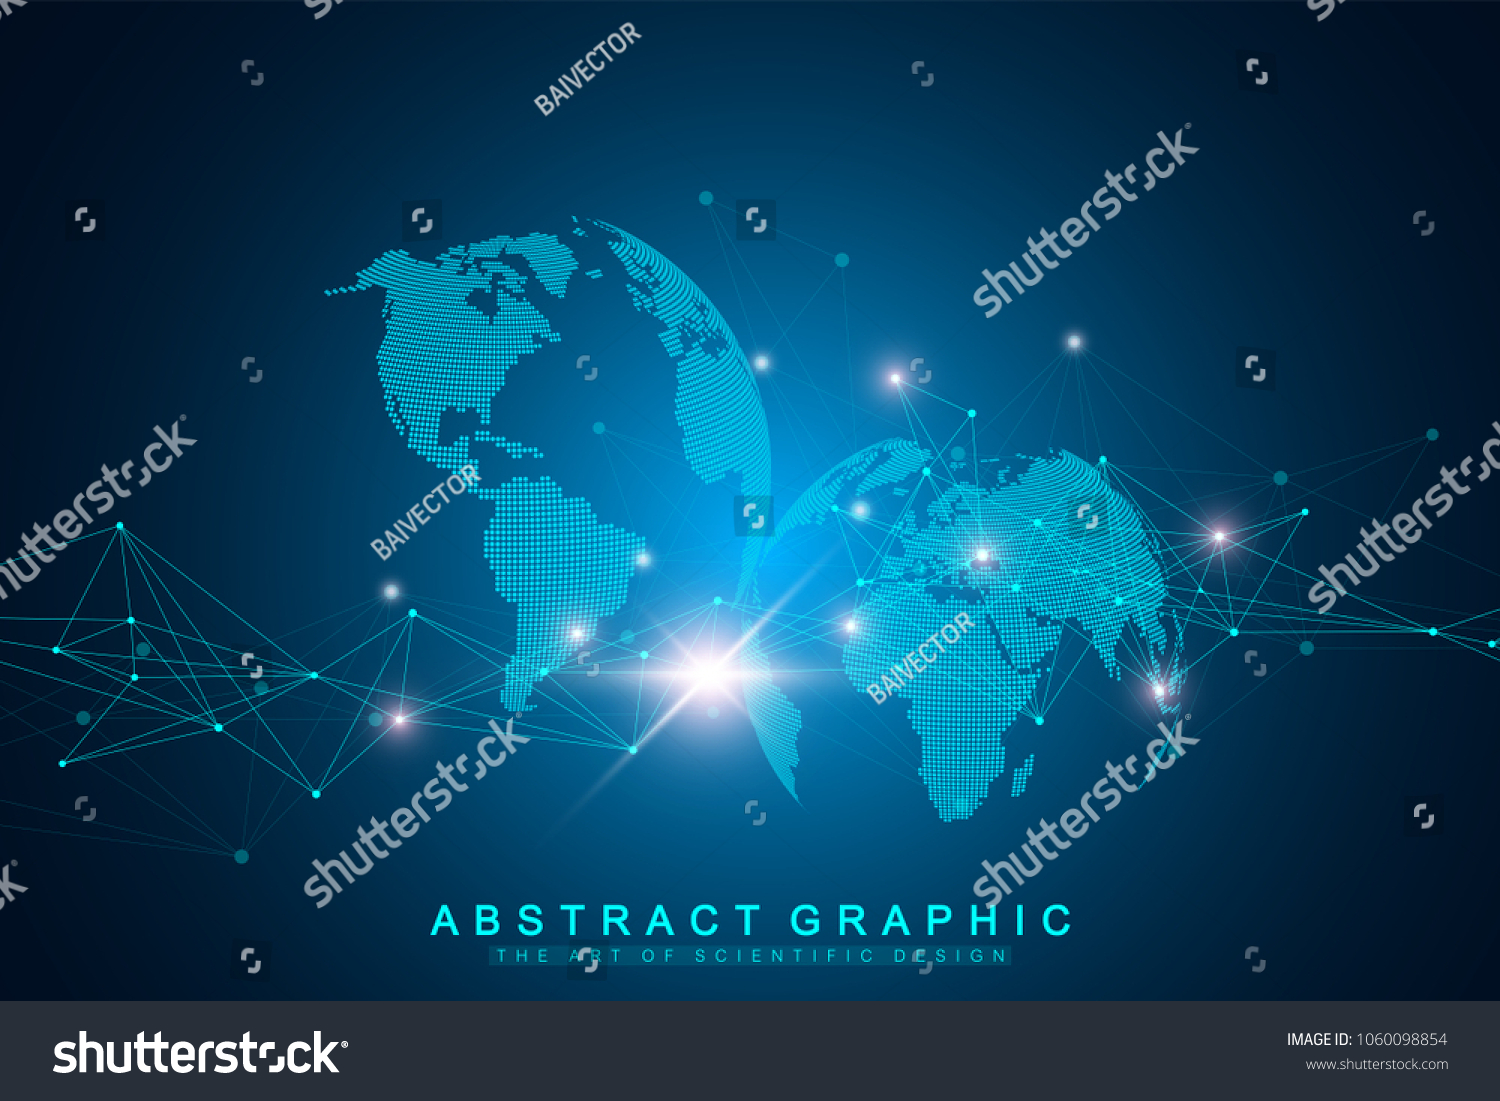 Geometric abstract background with connected line and dots. Graphic background for your design. Vector illustration #1060098854